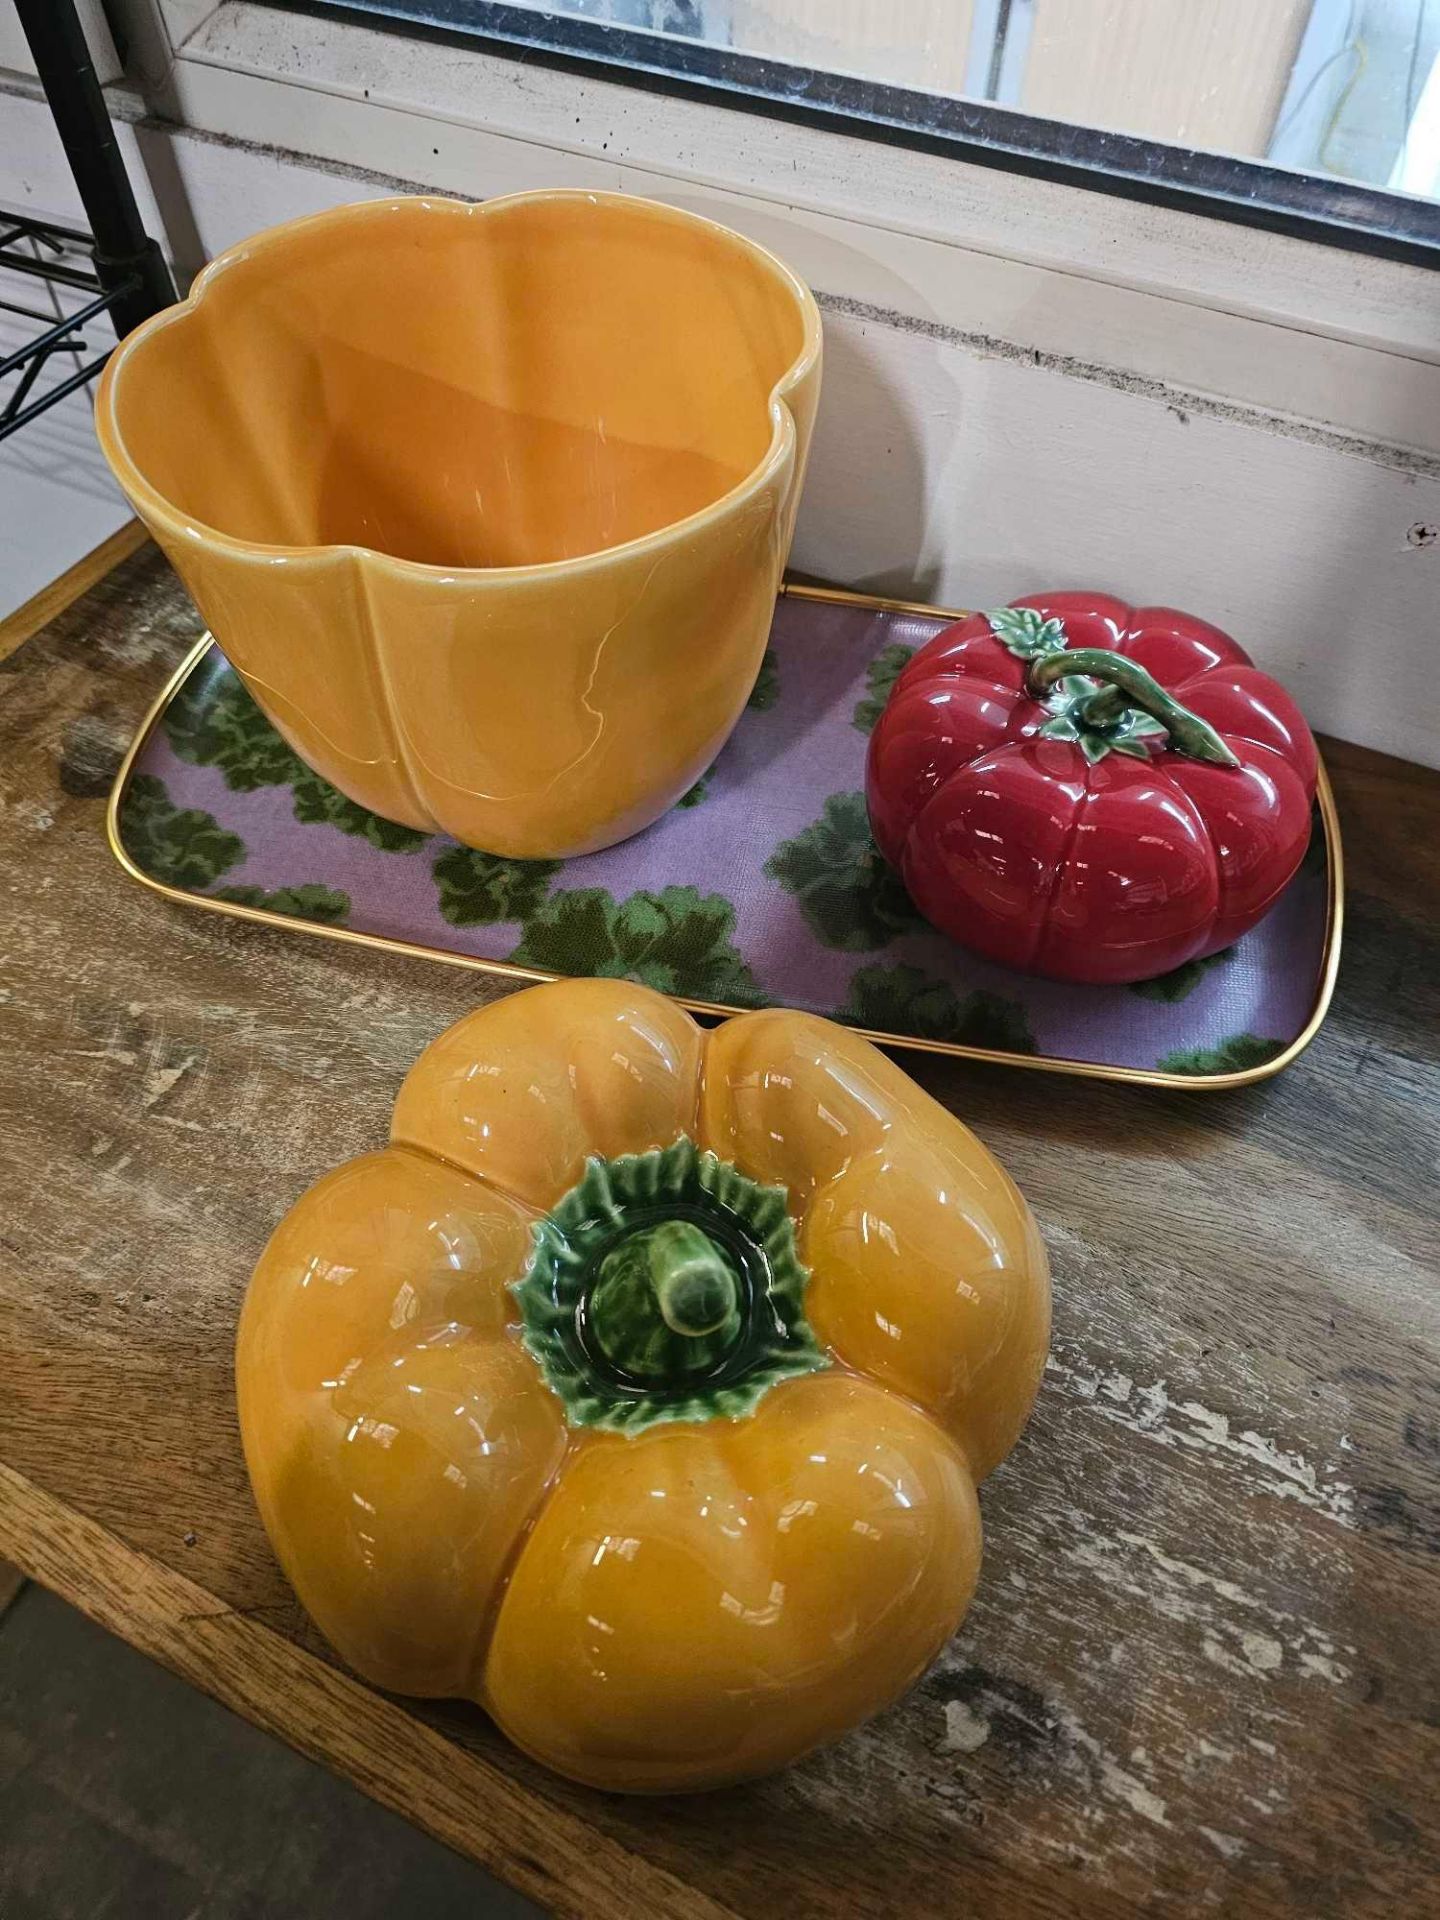 Decorative Objects To Include A Ceramic Yellow Pepper, Red Tomato And A Floral Patterned Purple/ - Image 3 of 3